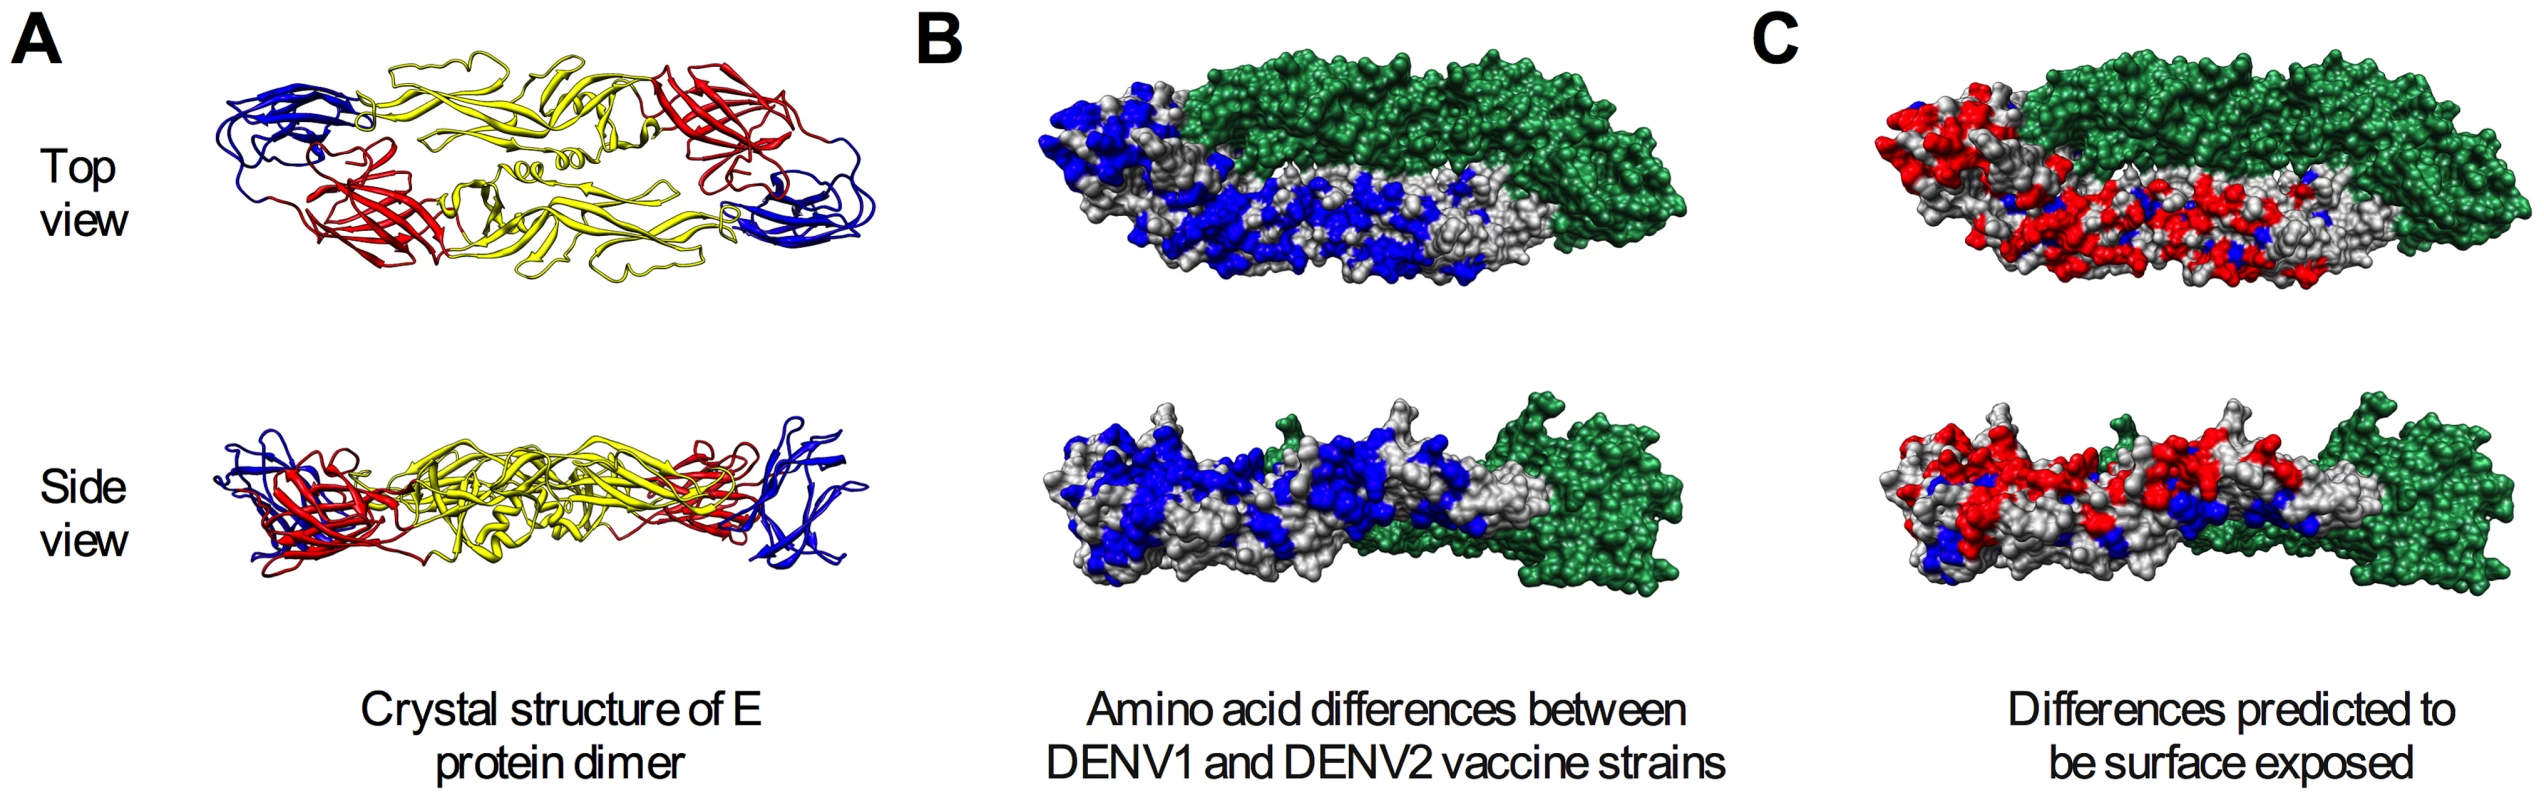 Surface-accessible residues that differ between DENV1 and DENV2 identified for mutagenesis.